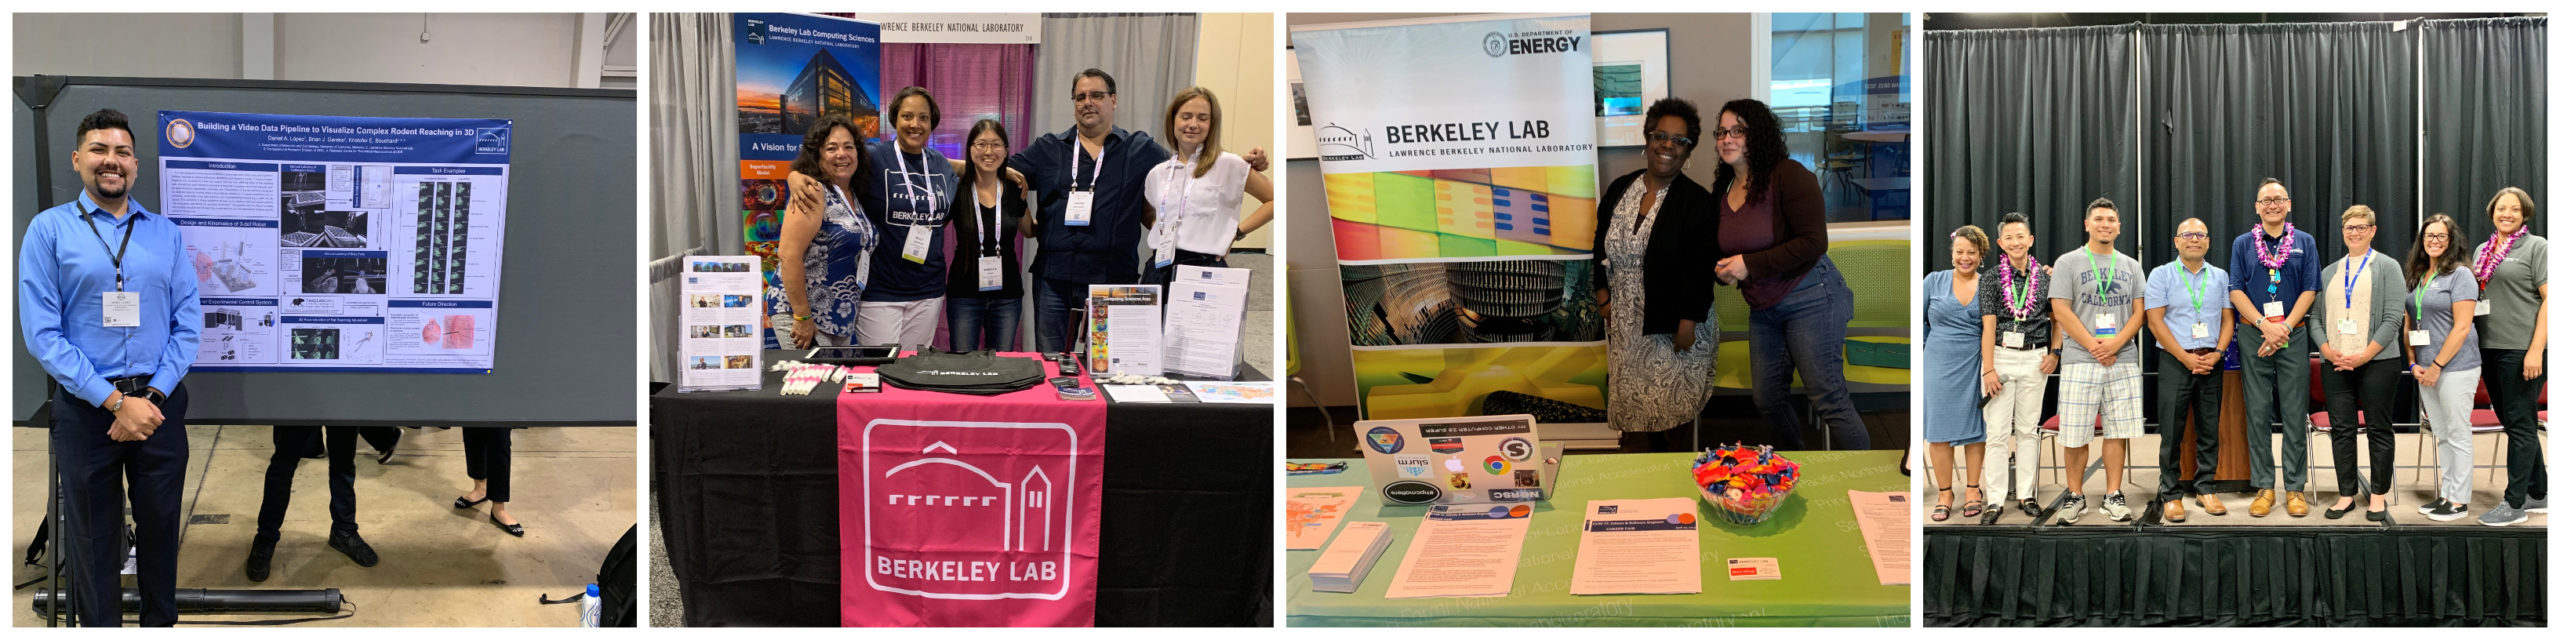 four pictures of Lab employees at different community events, promoting Lab activities, STEM and diverse employment opportunities; group photos at events